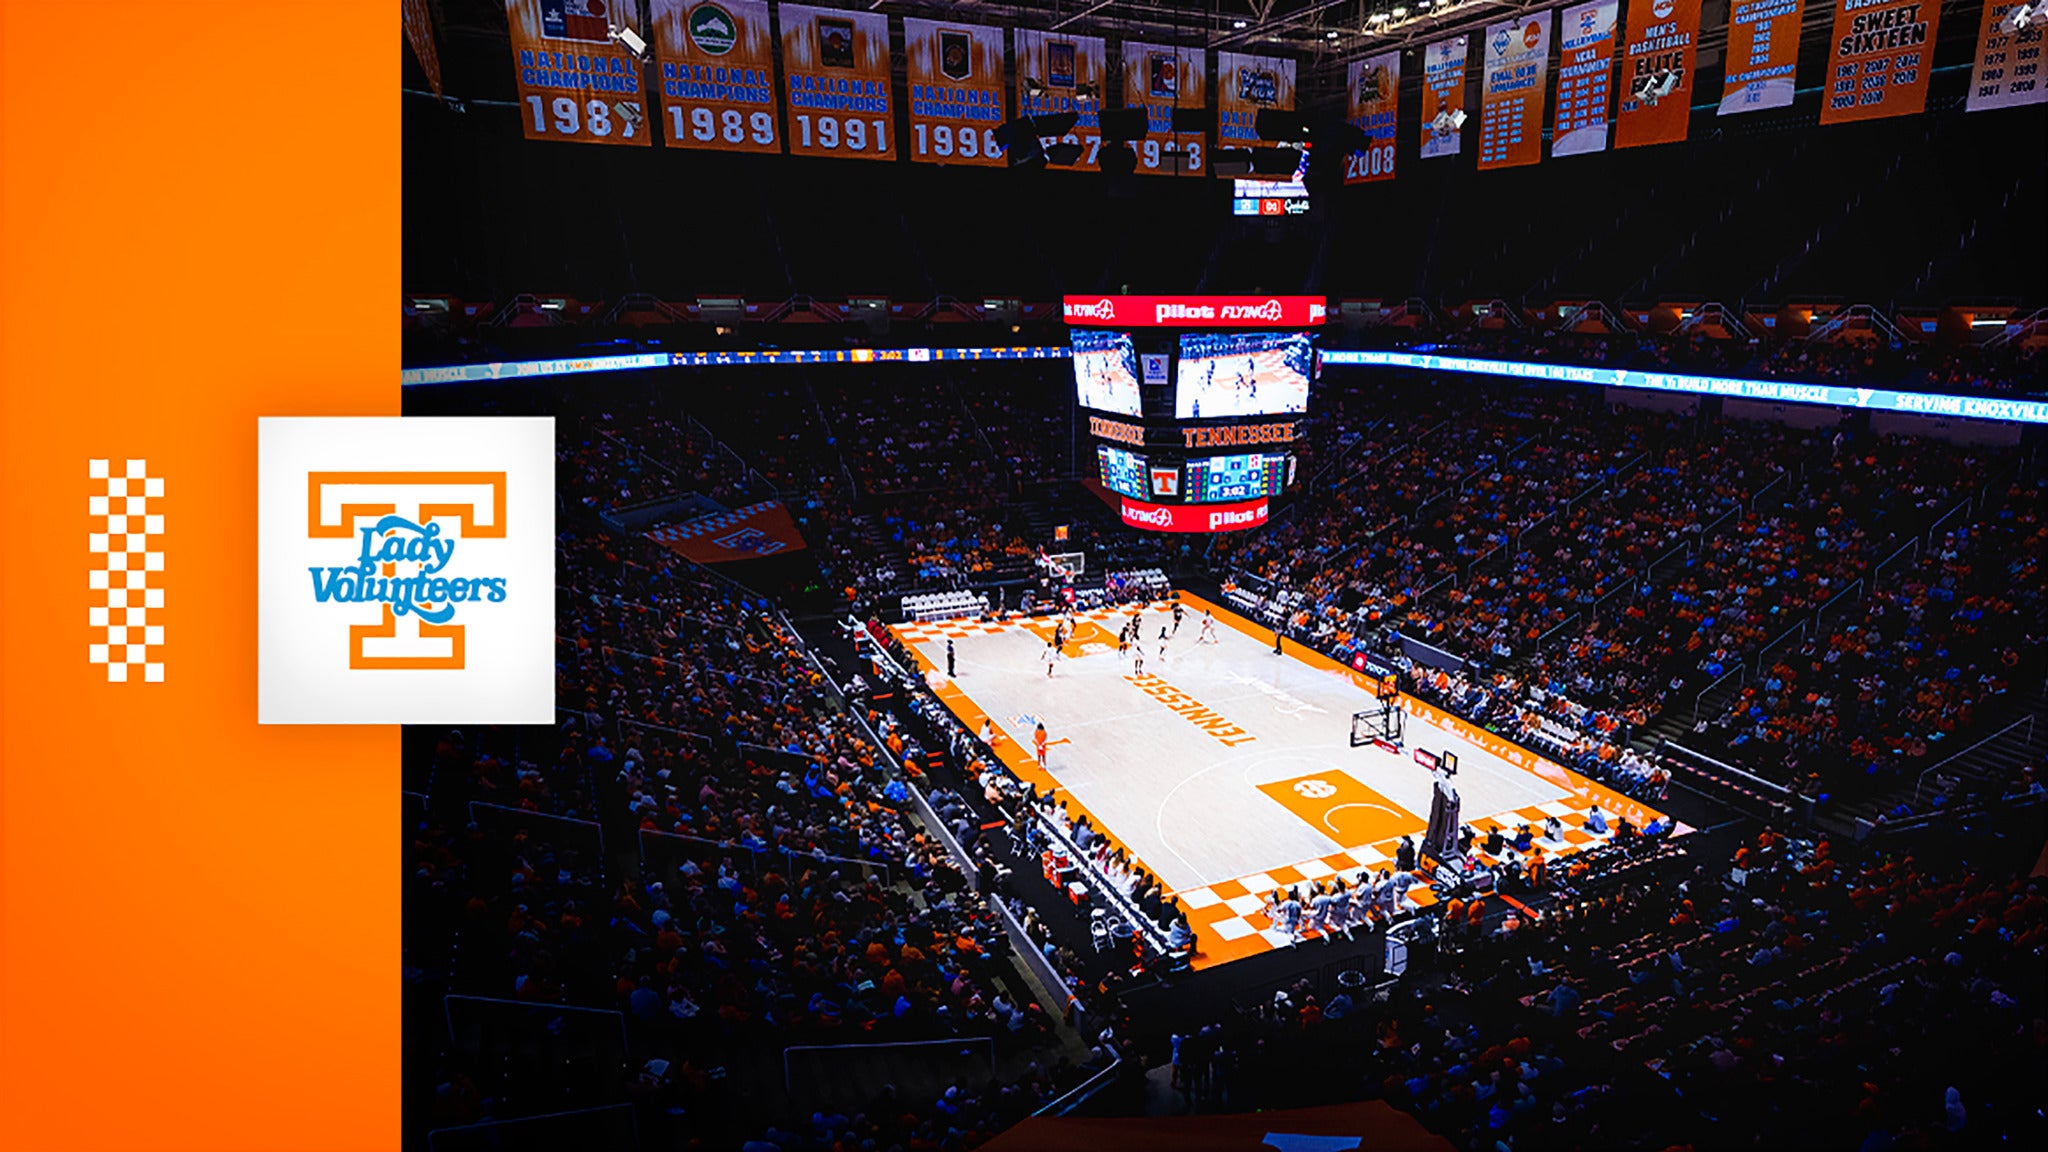 Lady Vol Basketball Weekday Family 4 Pack: Lady Vols vs. Ole Miss